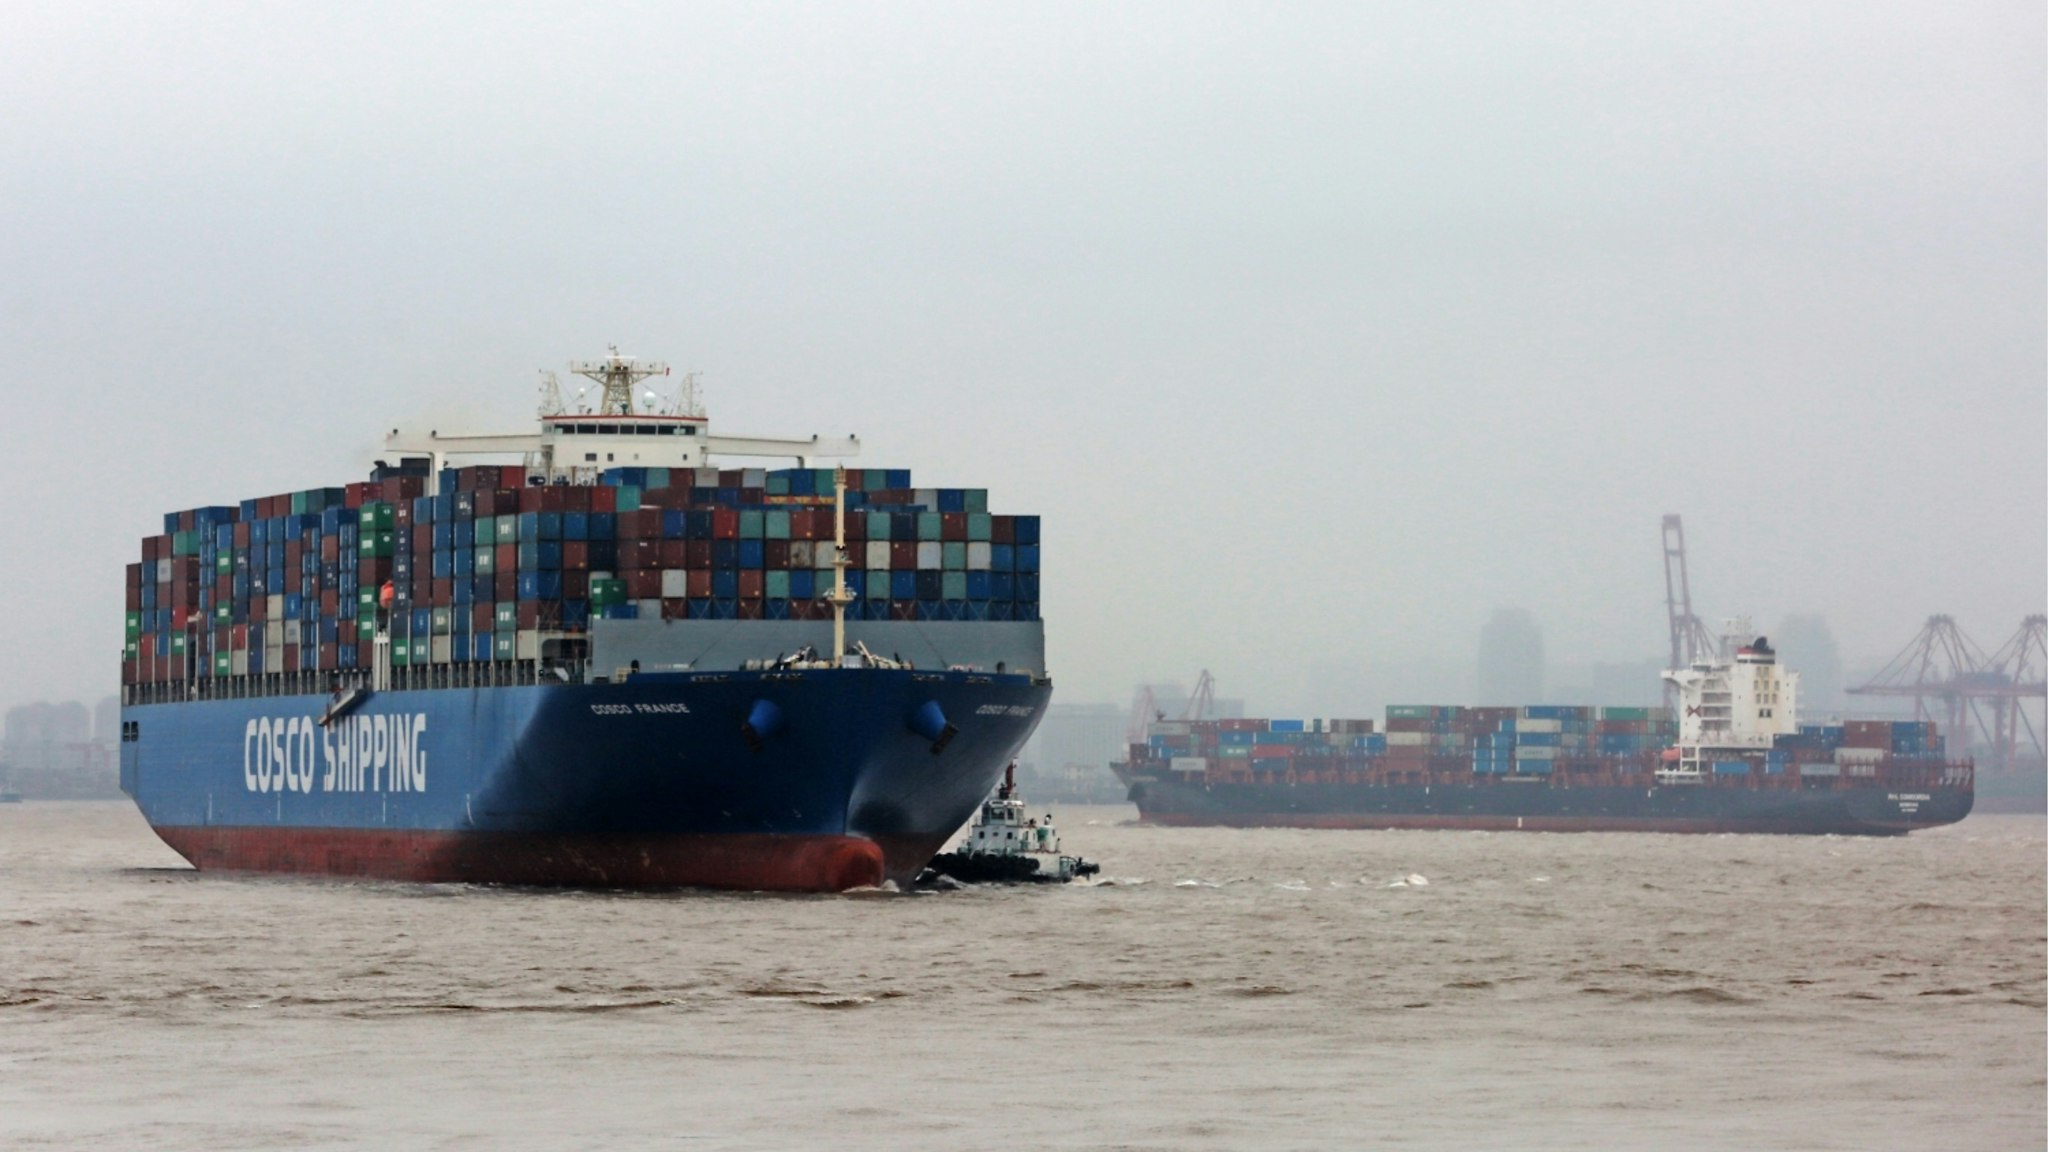 A Cosco France container ship berths with the help of tugboats at the Port of Ningbo-Zhoushan on September 1, 2019 in Zhoushan, Zhejiang Province of China.